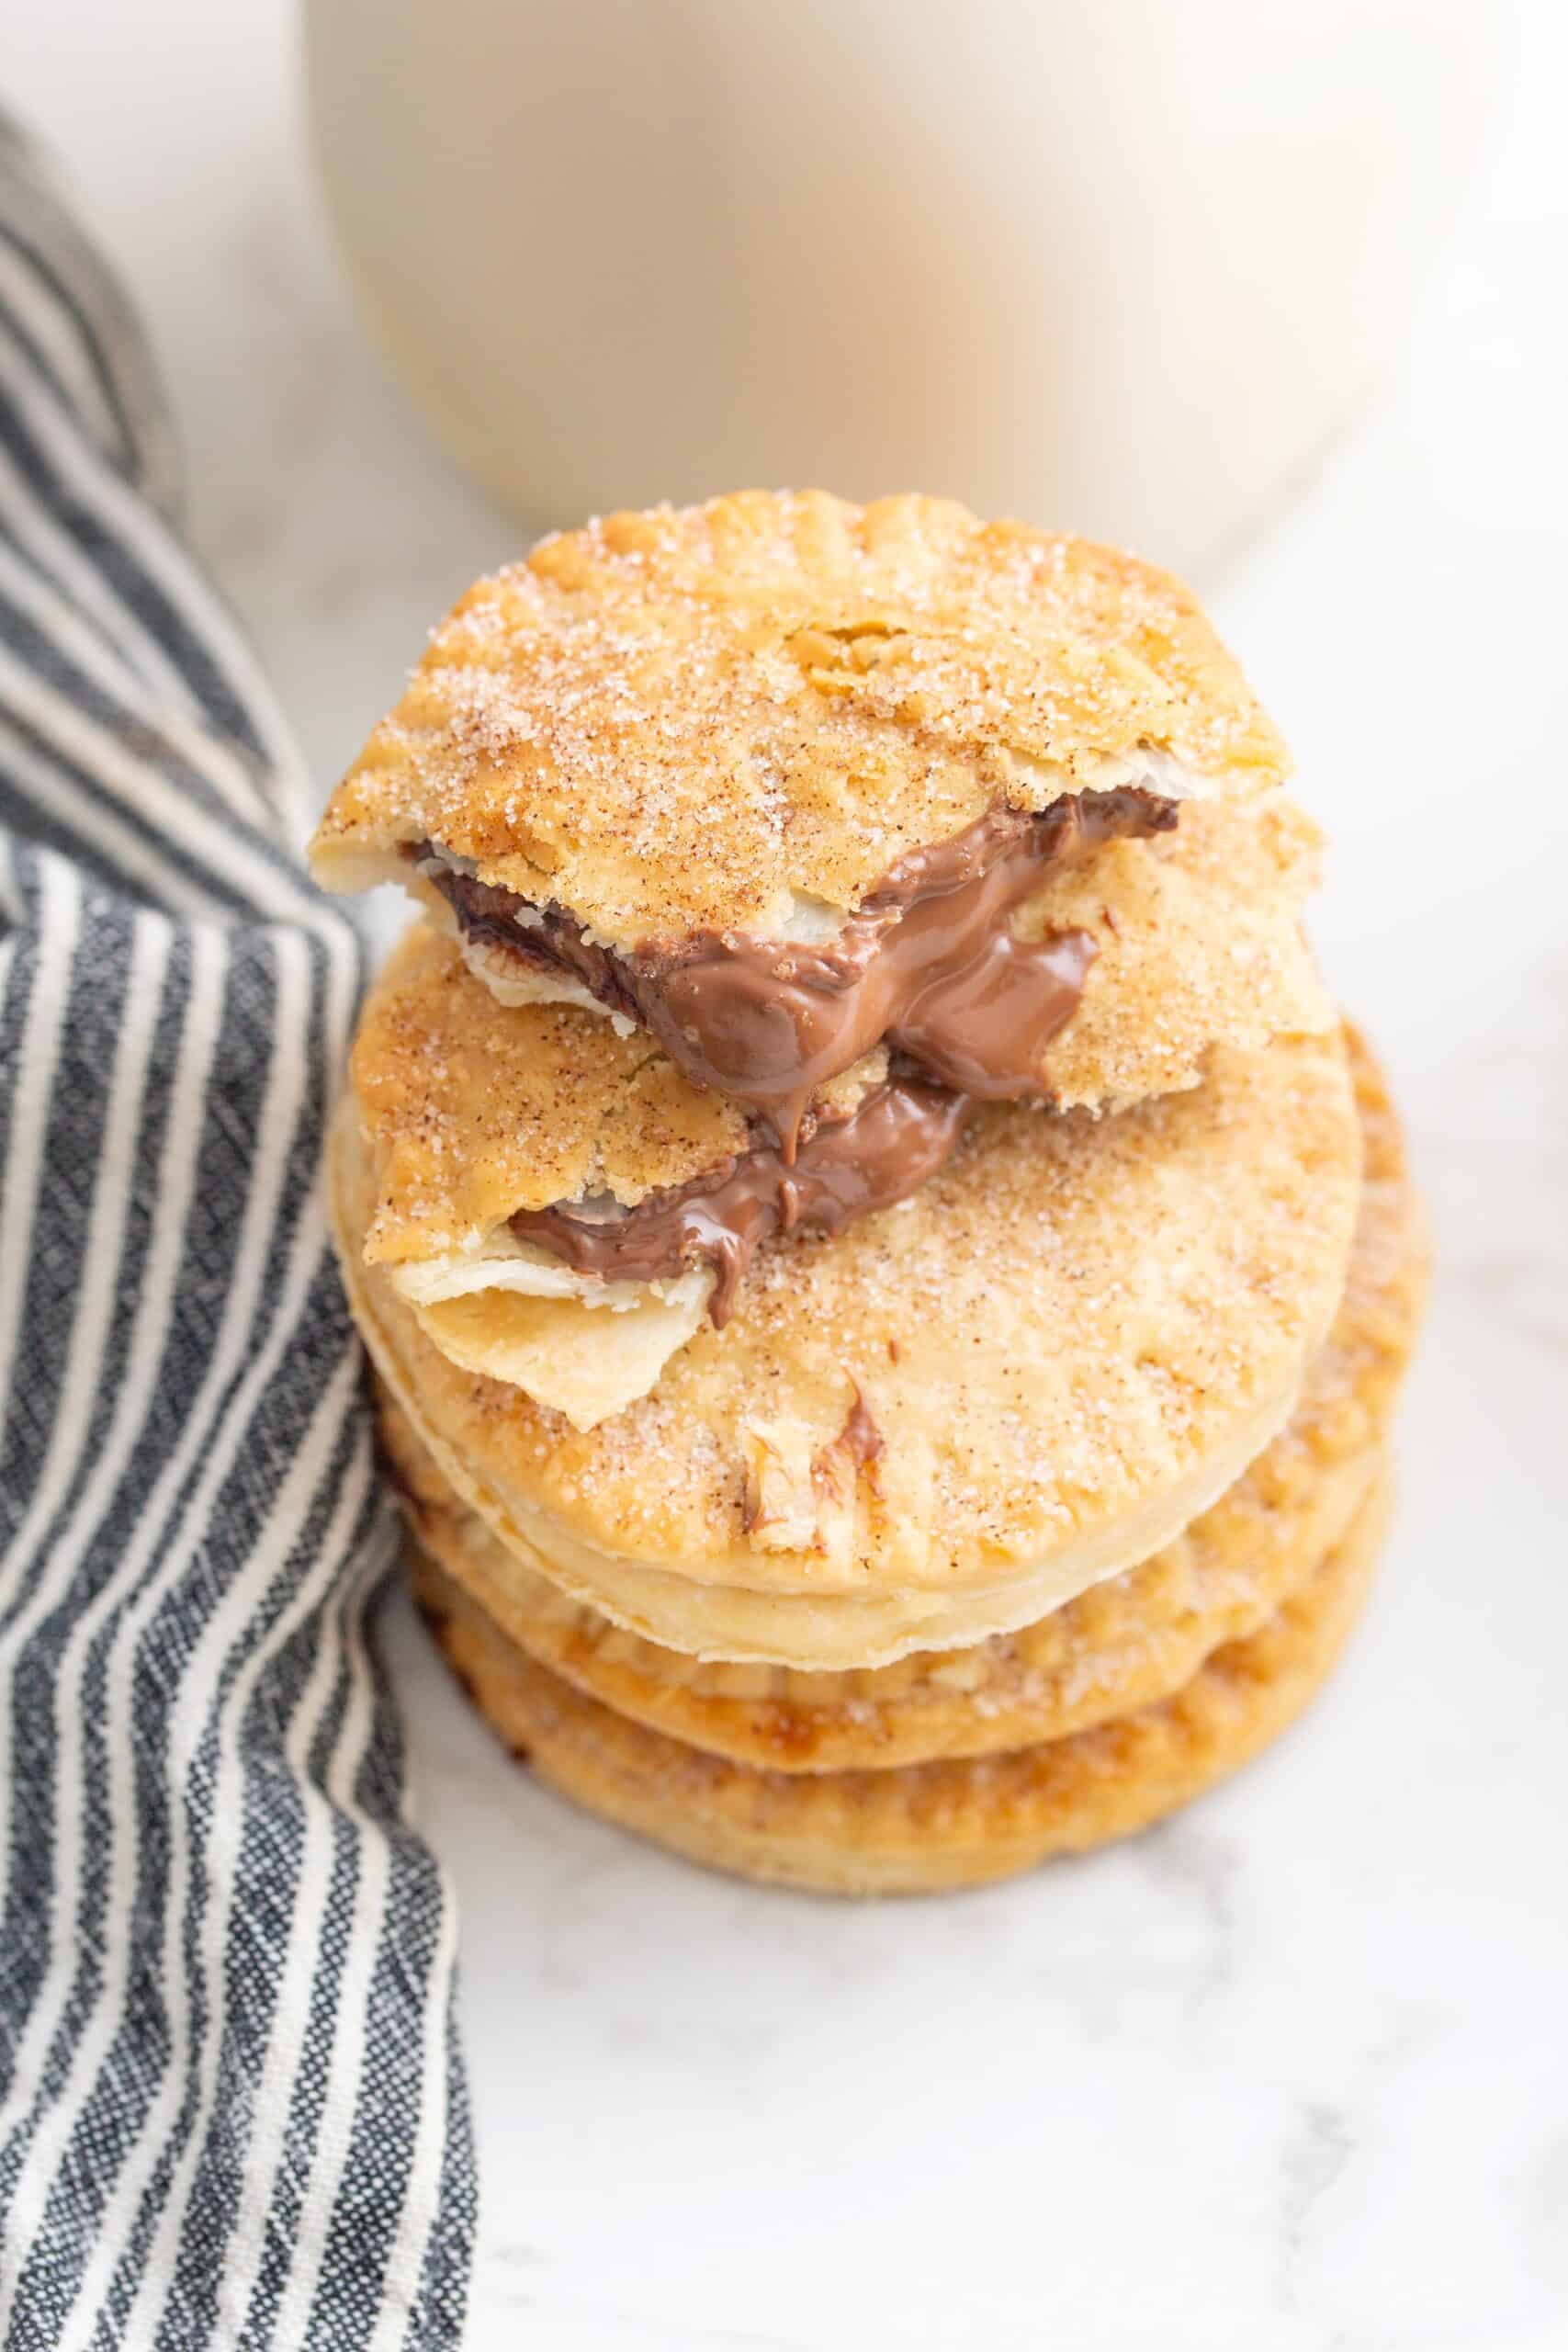 Nutella pastry recipes: air fryer chocolate hand pies